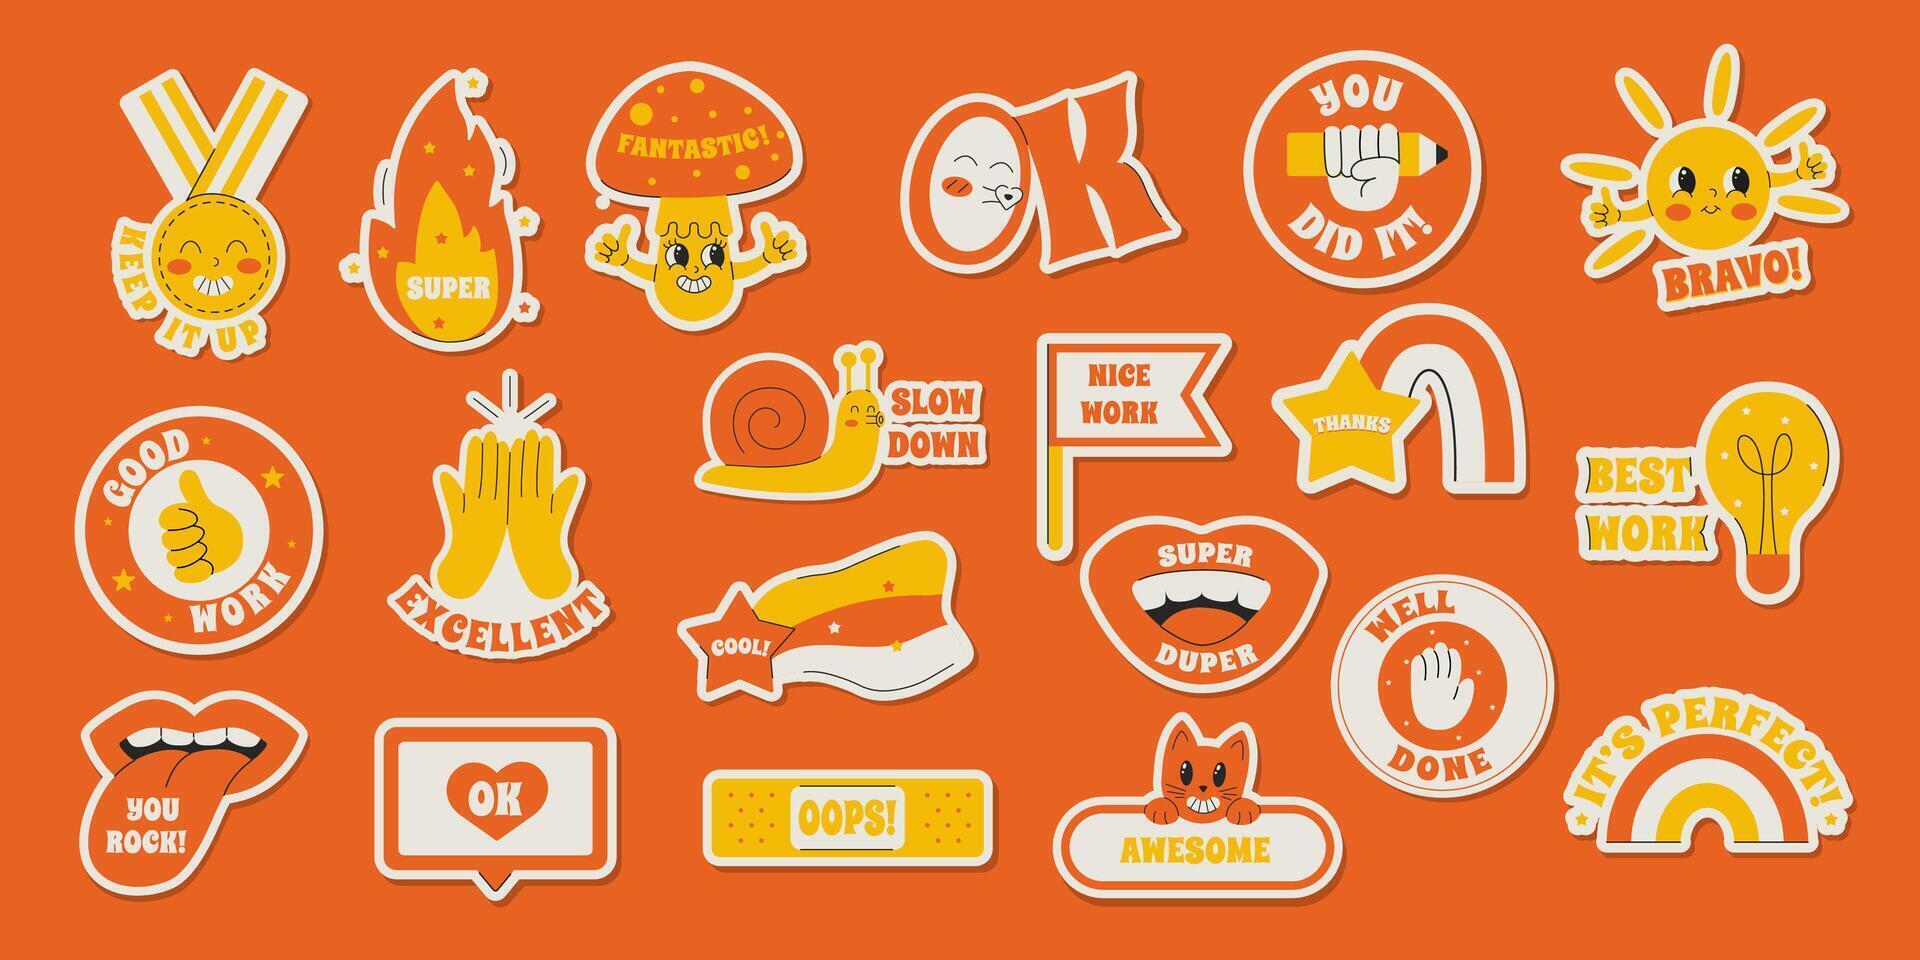 Set of Stickers Positive Saying Good job, nice work, super, bravo, well done. Illustration in Retro Groovy Style. vector